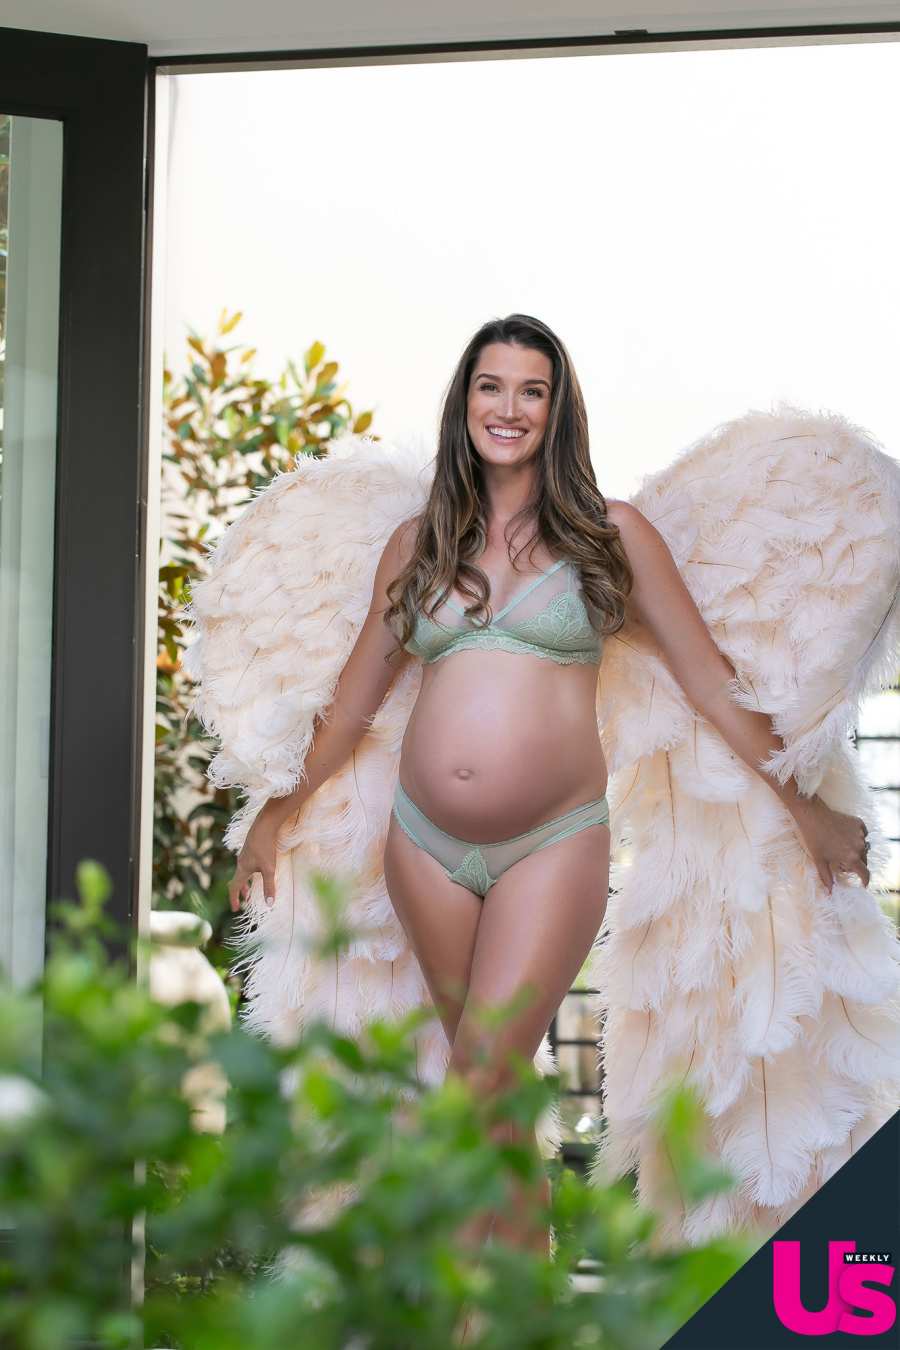 Pregnant Jade Roper Wears Wings in Stunning Maternity Shoot Ahead of 3rd Child